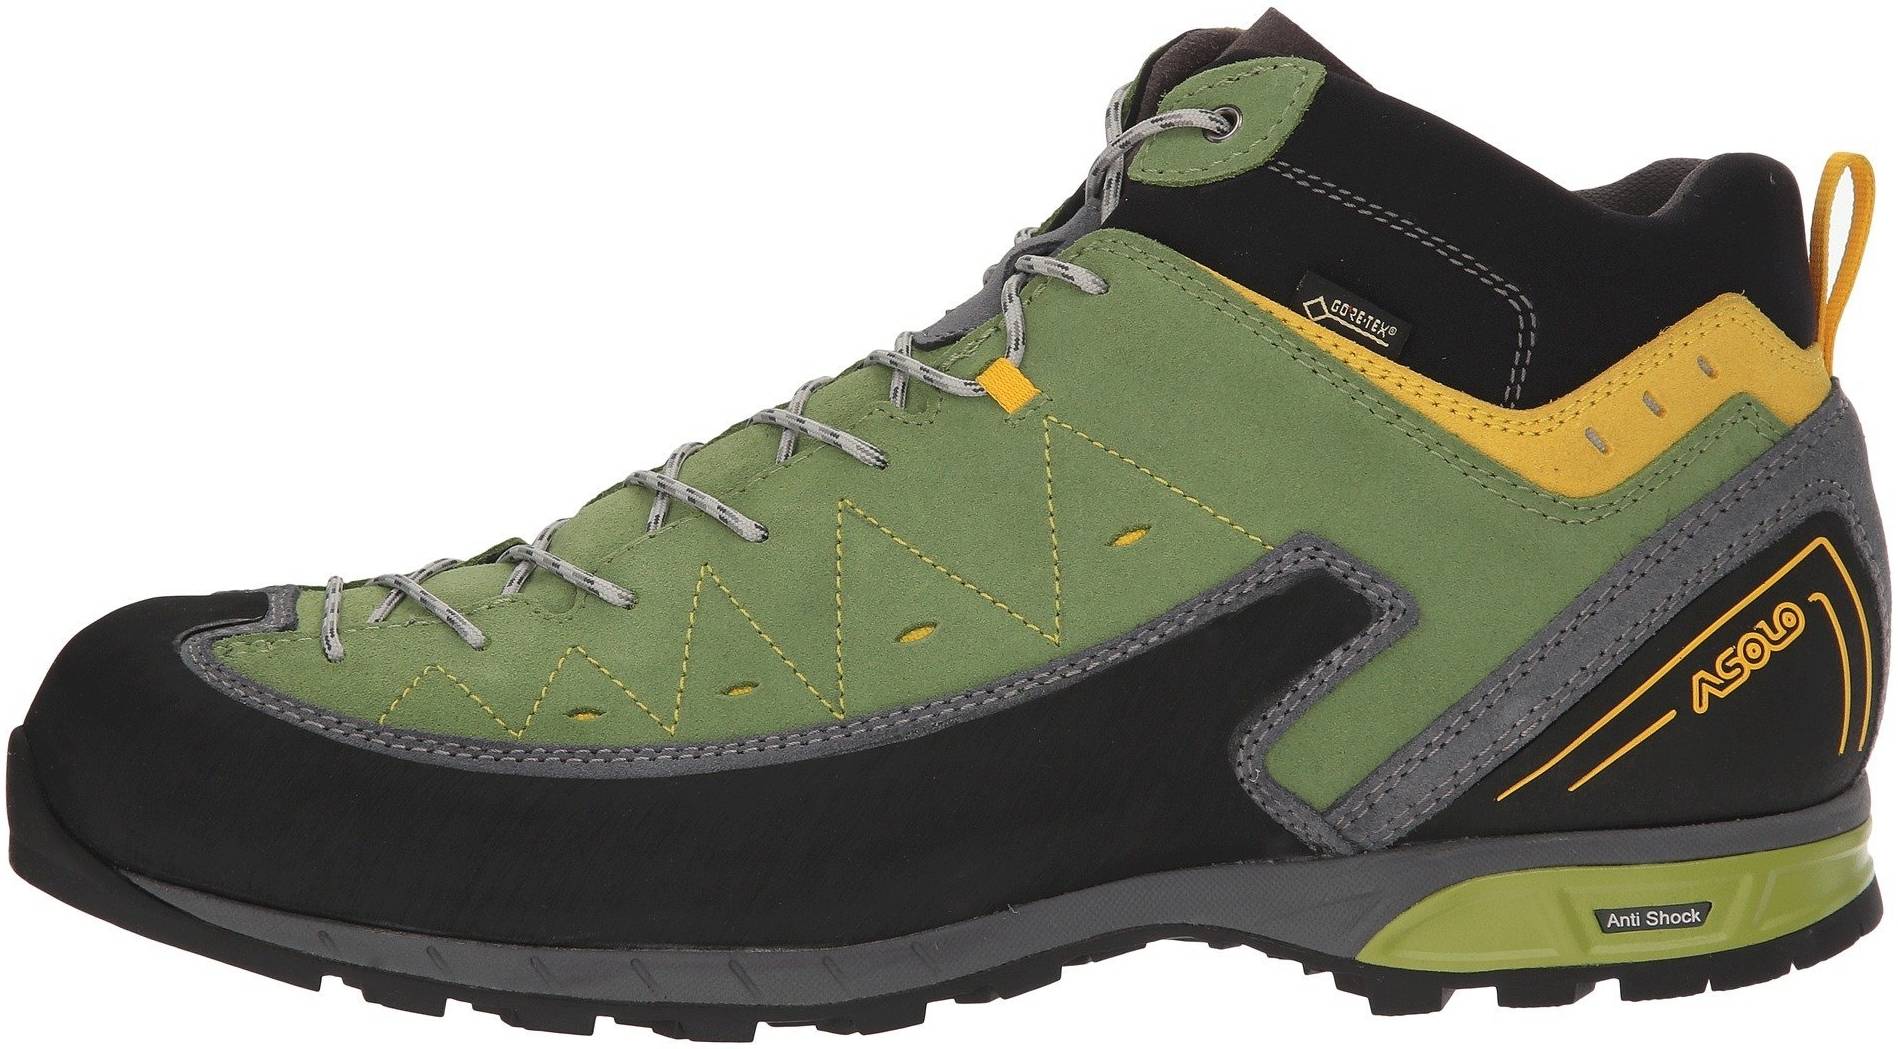 Save 25% on Asolo Approach Shoes (1 